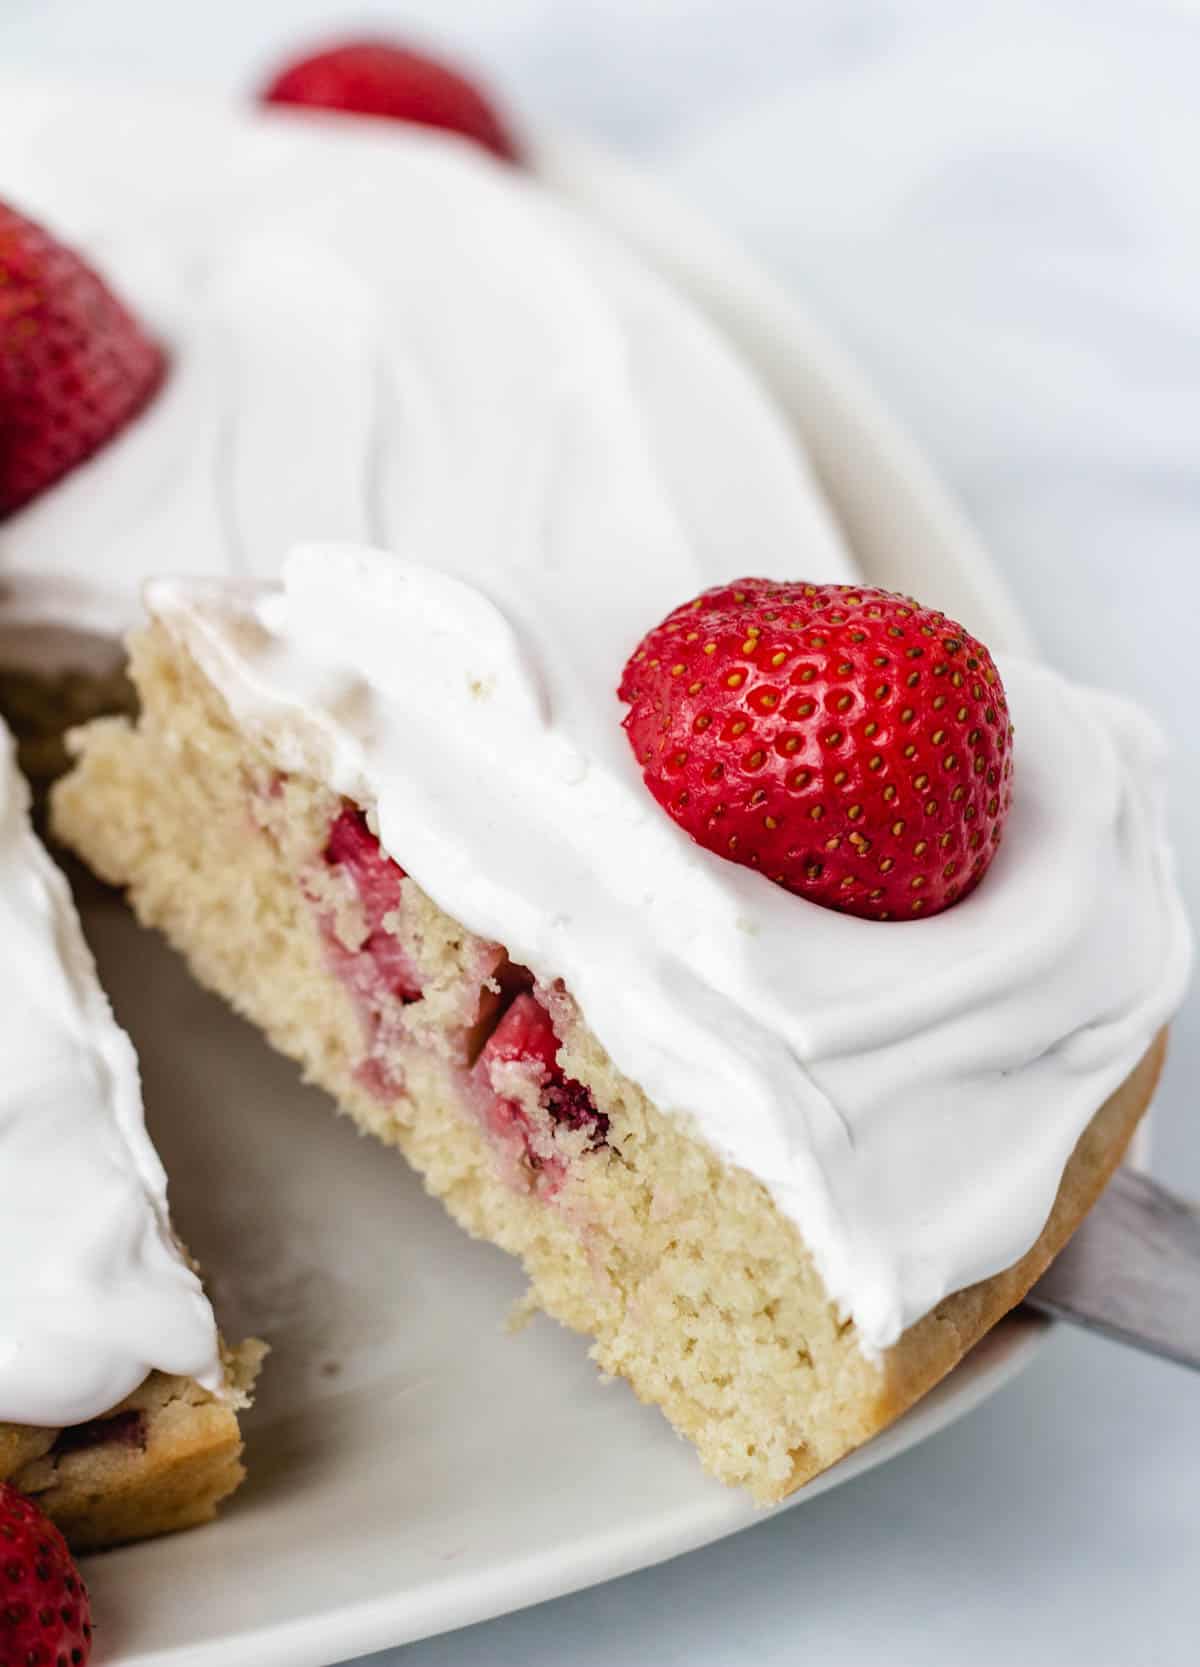 Slice of strawberry cake topped with a fresh strawberry.